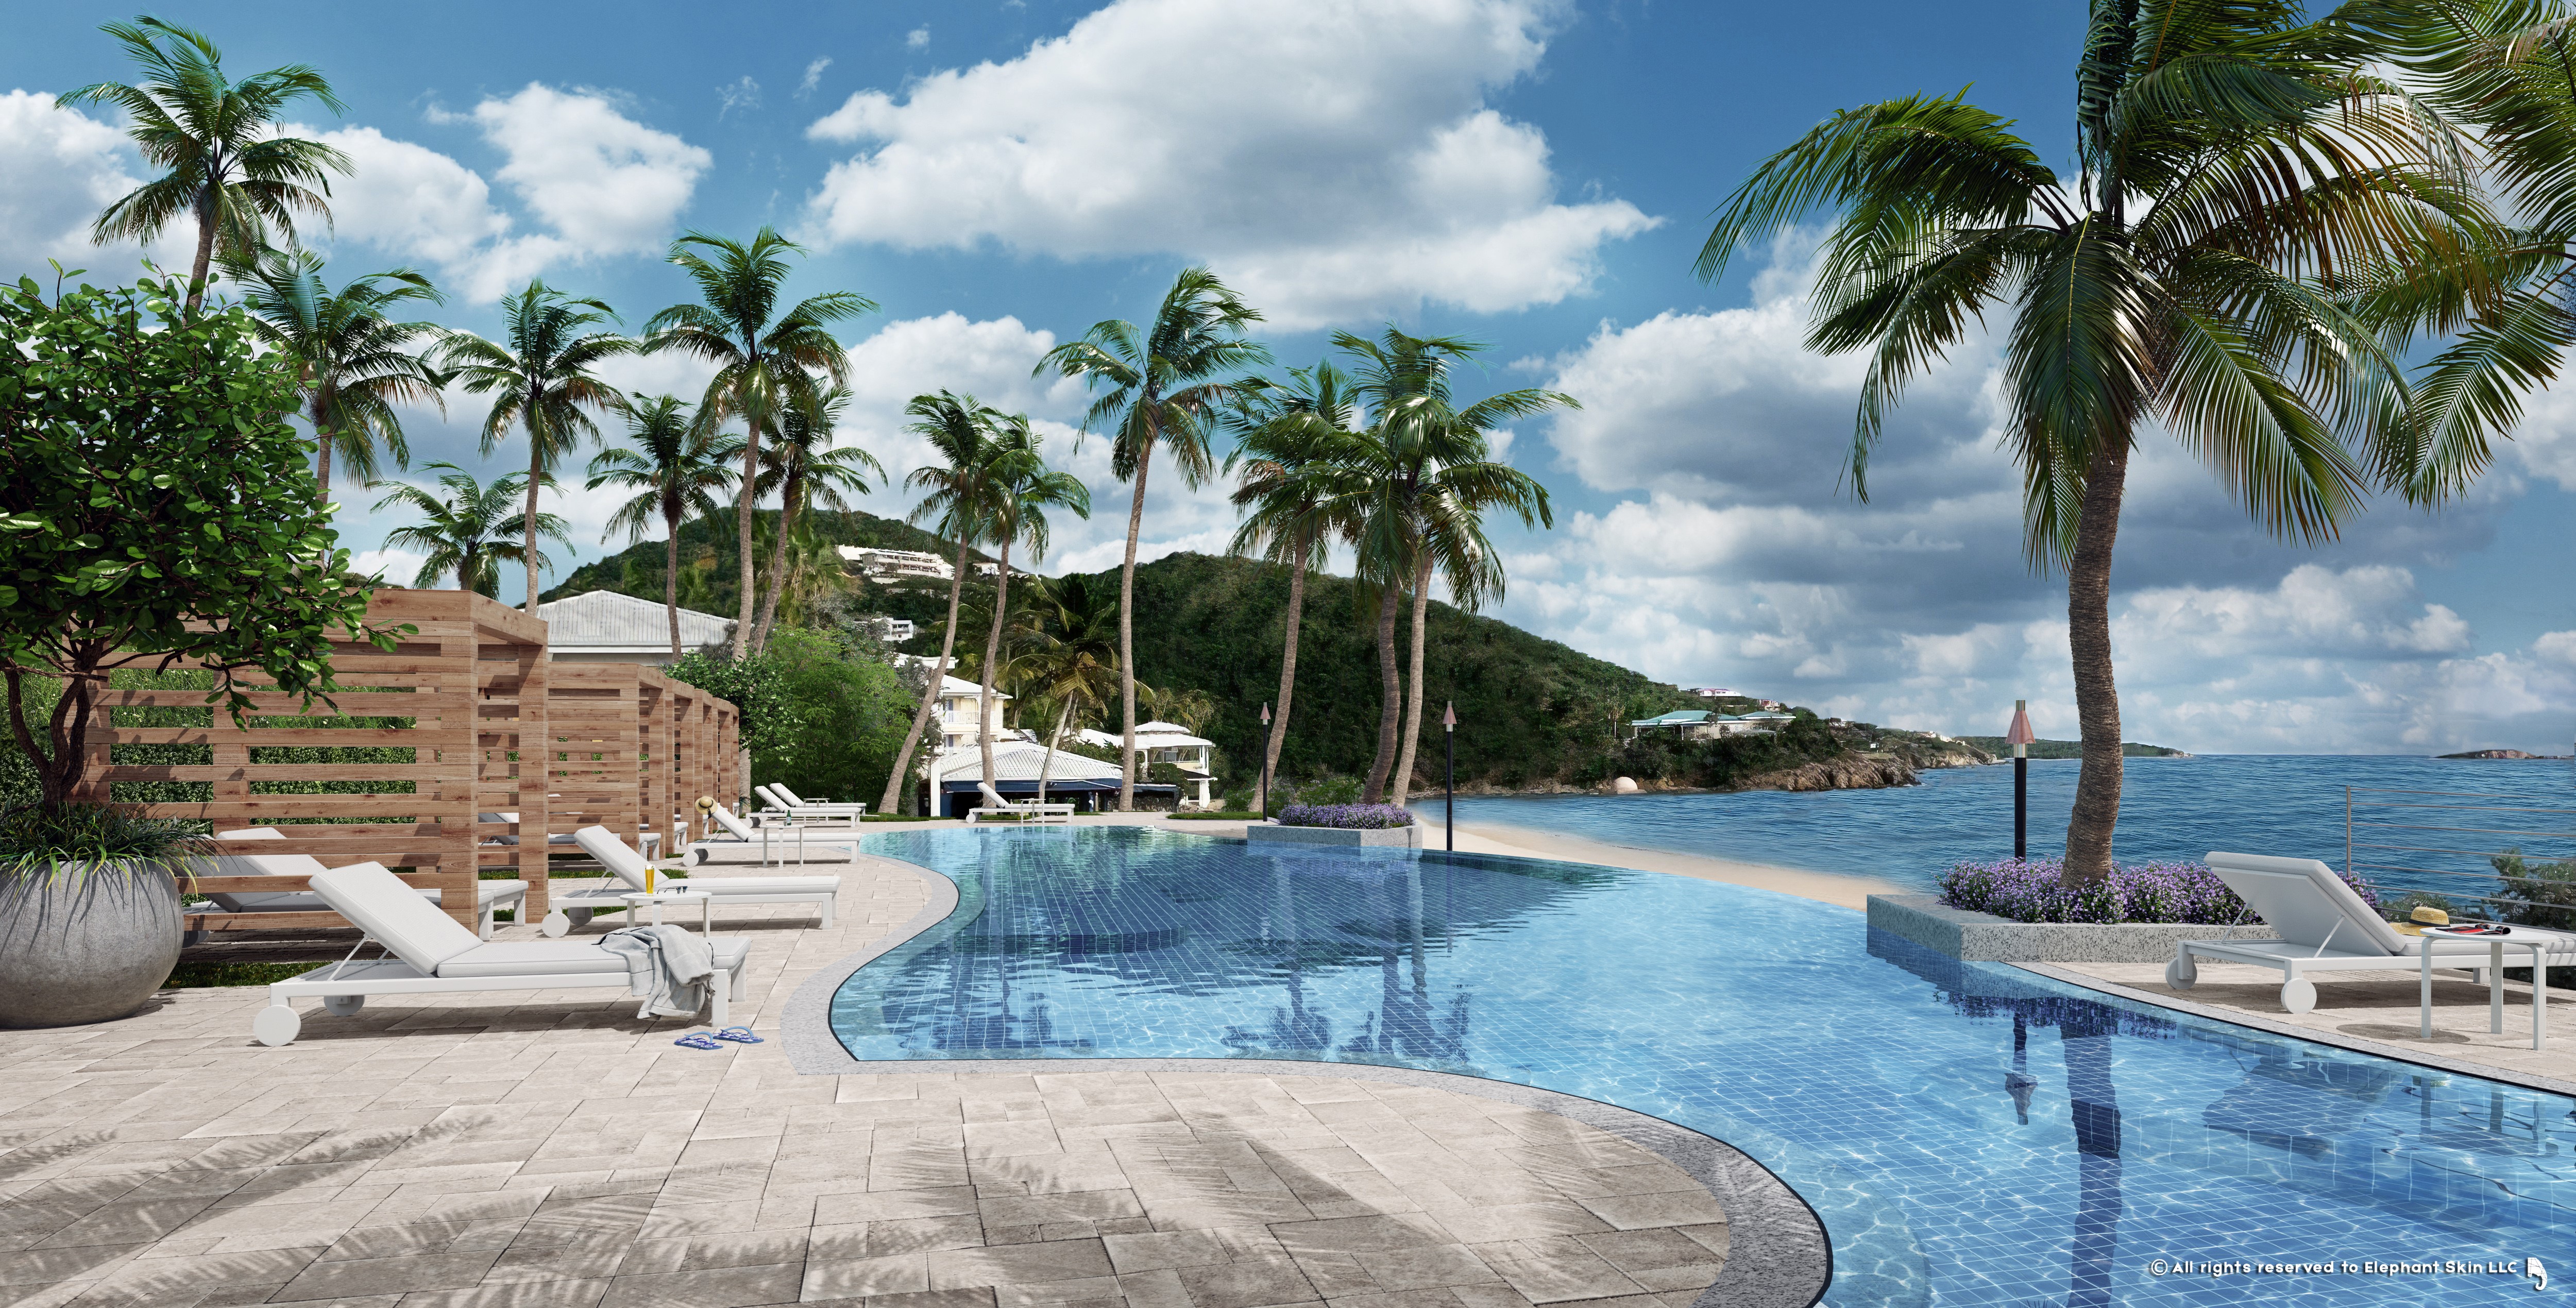 Artist's rendering of a pool planned for the renovations of St. Thomas' Frenchman's Reef resort. (Image submitted by DiamondRock Hospitality Company)